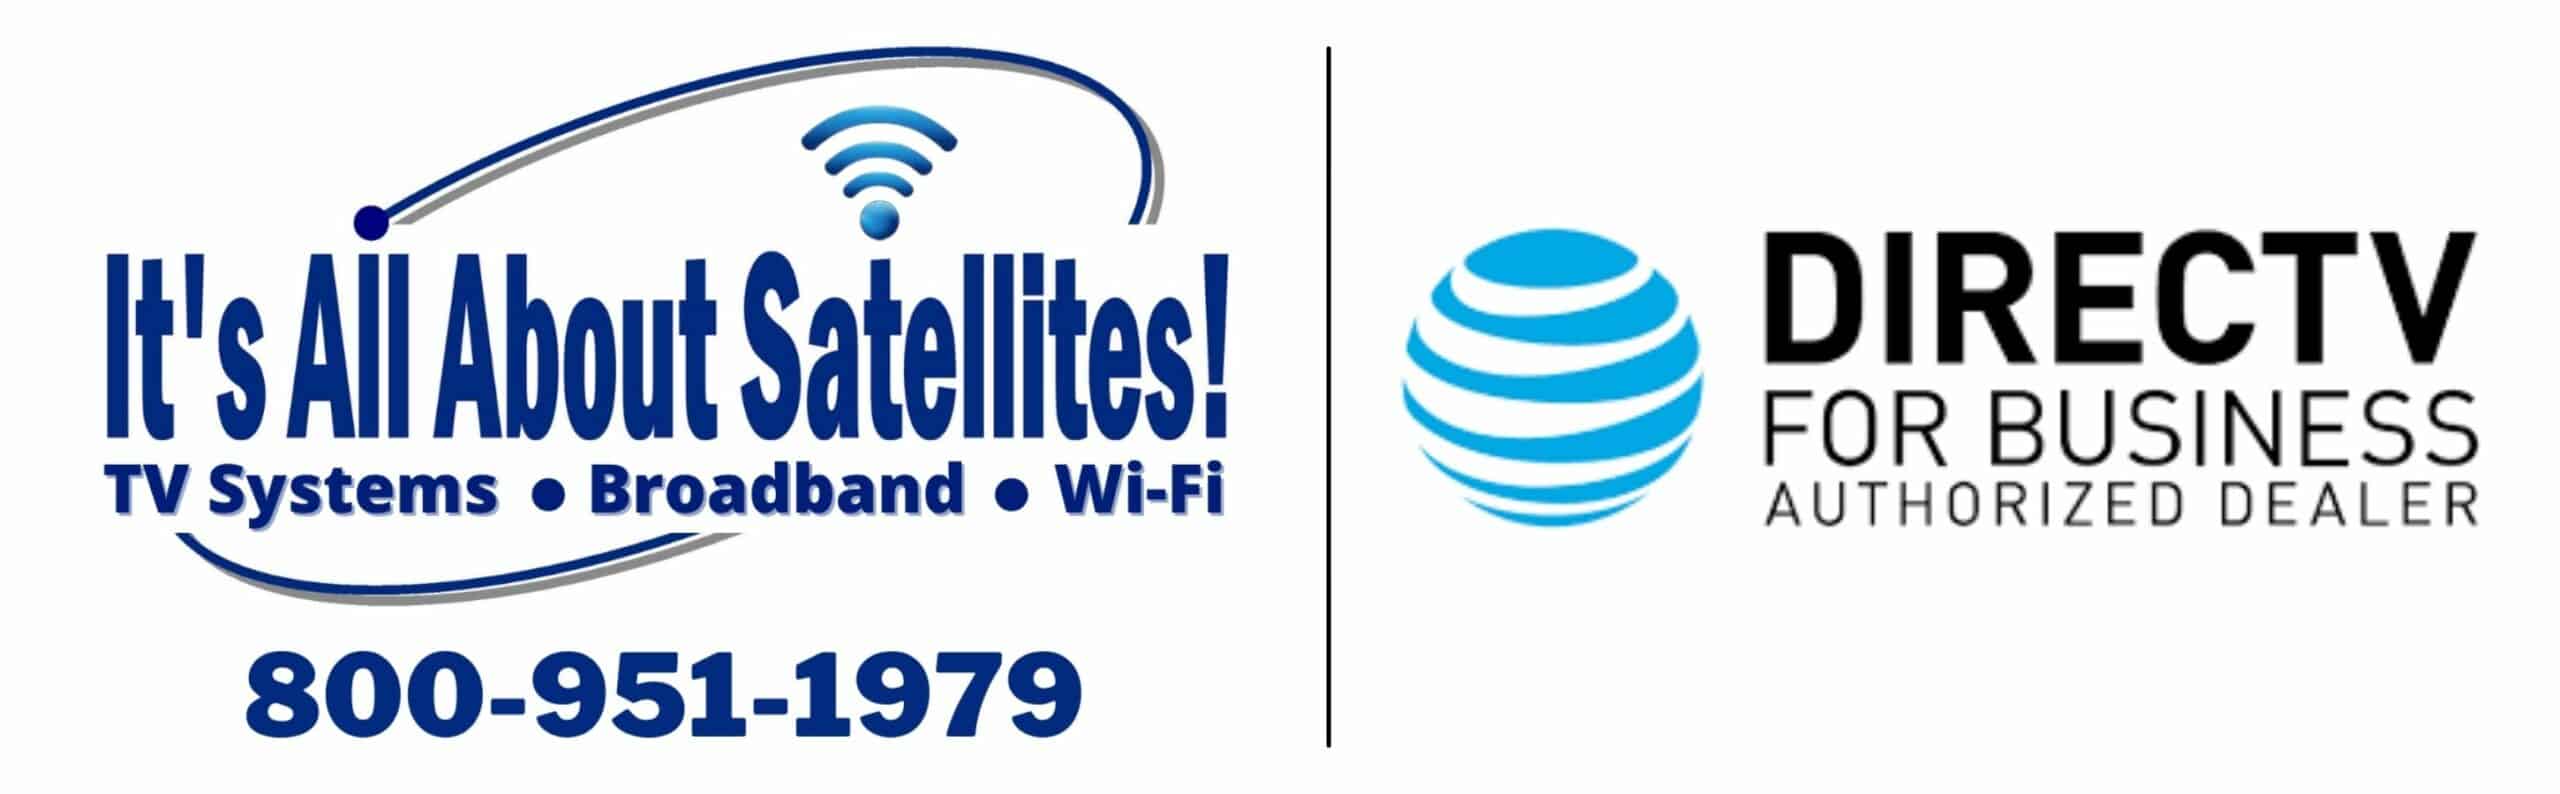 Who We Are - Its All About Satellites DIRECTV for Business Authorized Dealer